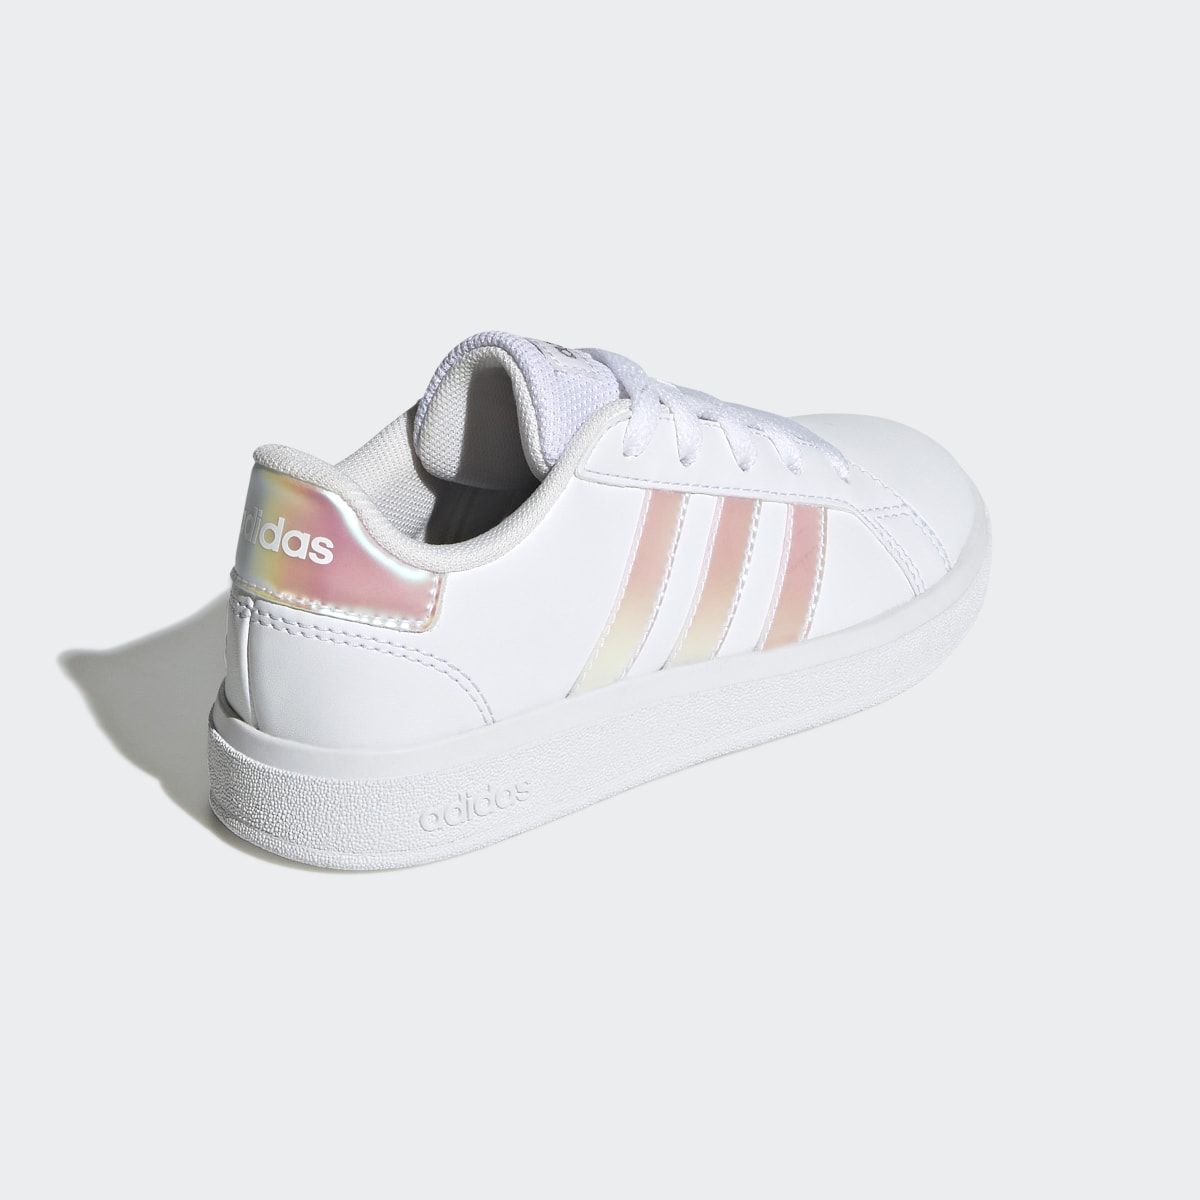 Adidas Buty Grand Court Lifestyle Lace Tennis. 6